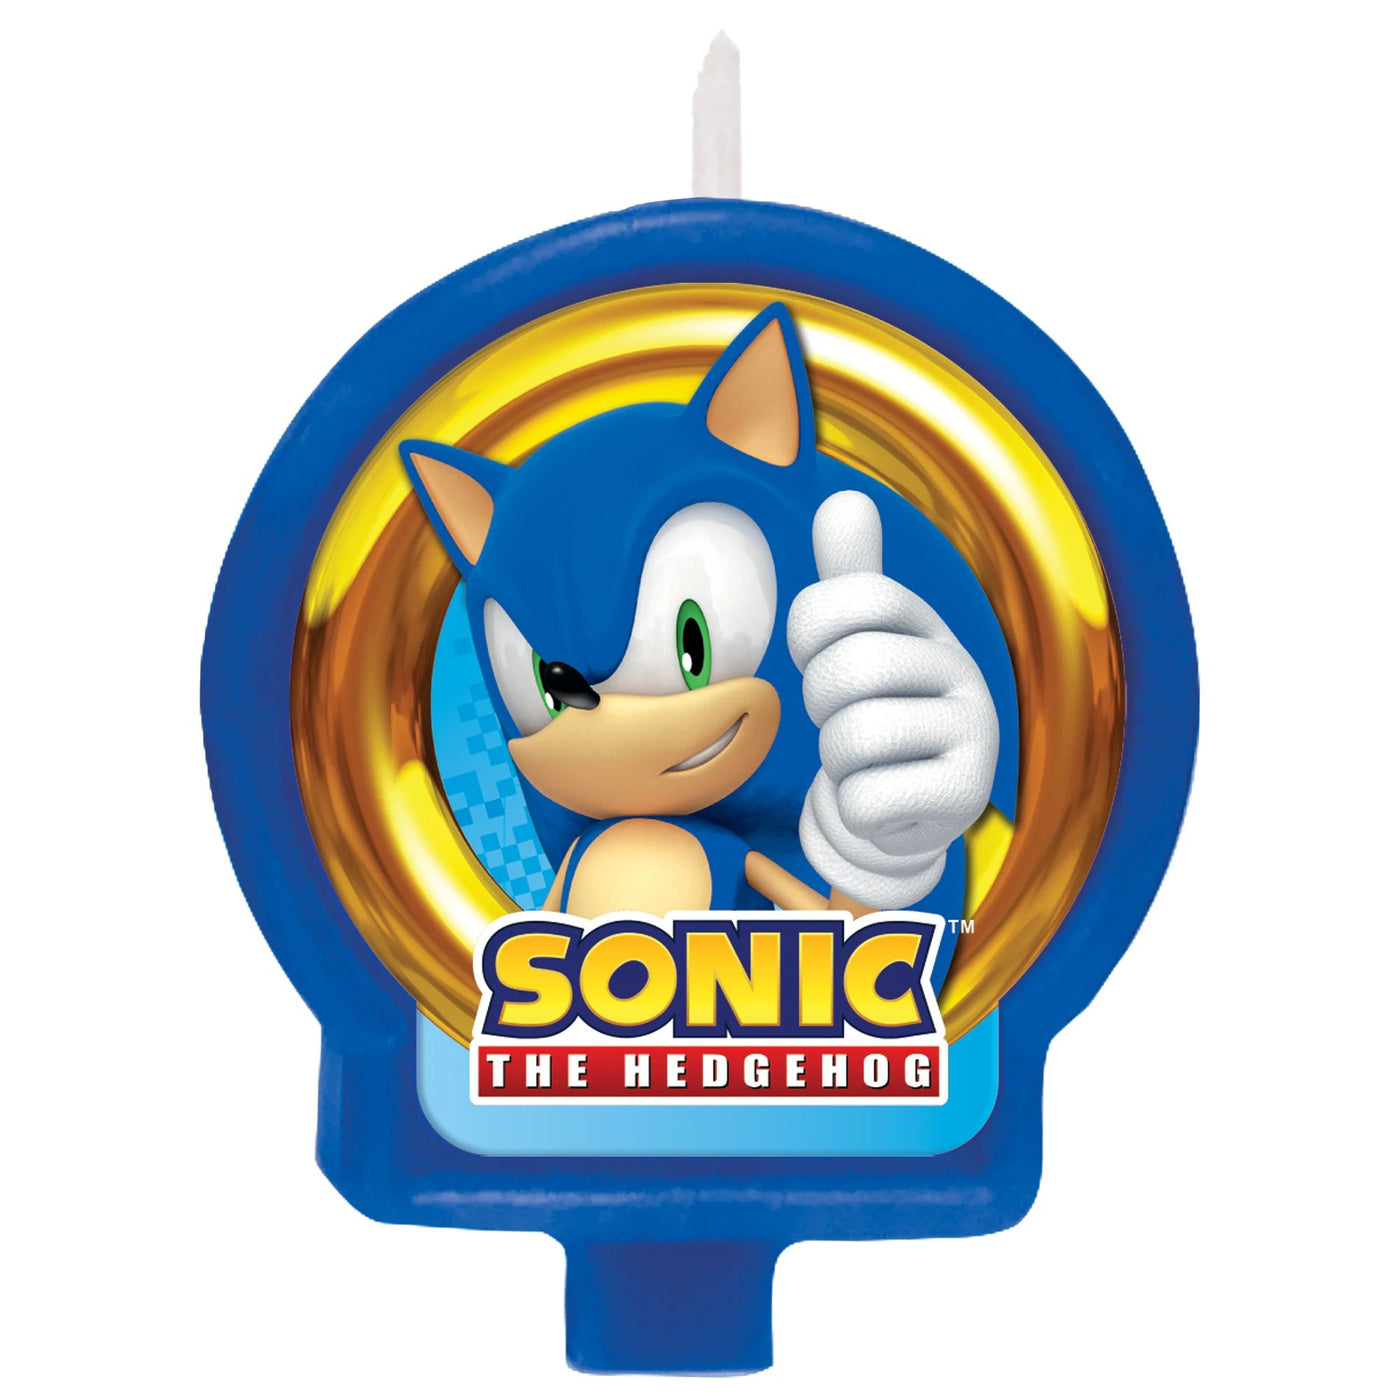 Sonic the Hedgehog Shaped Birthday Candle